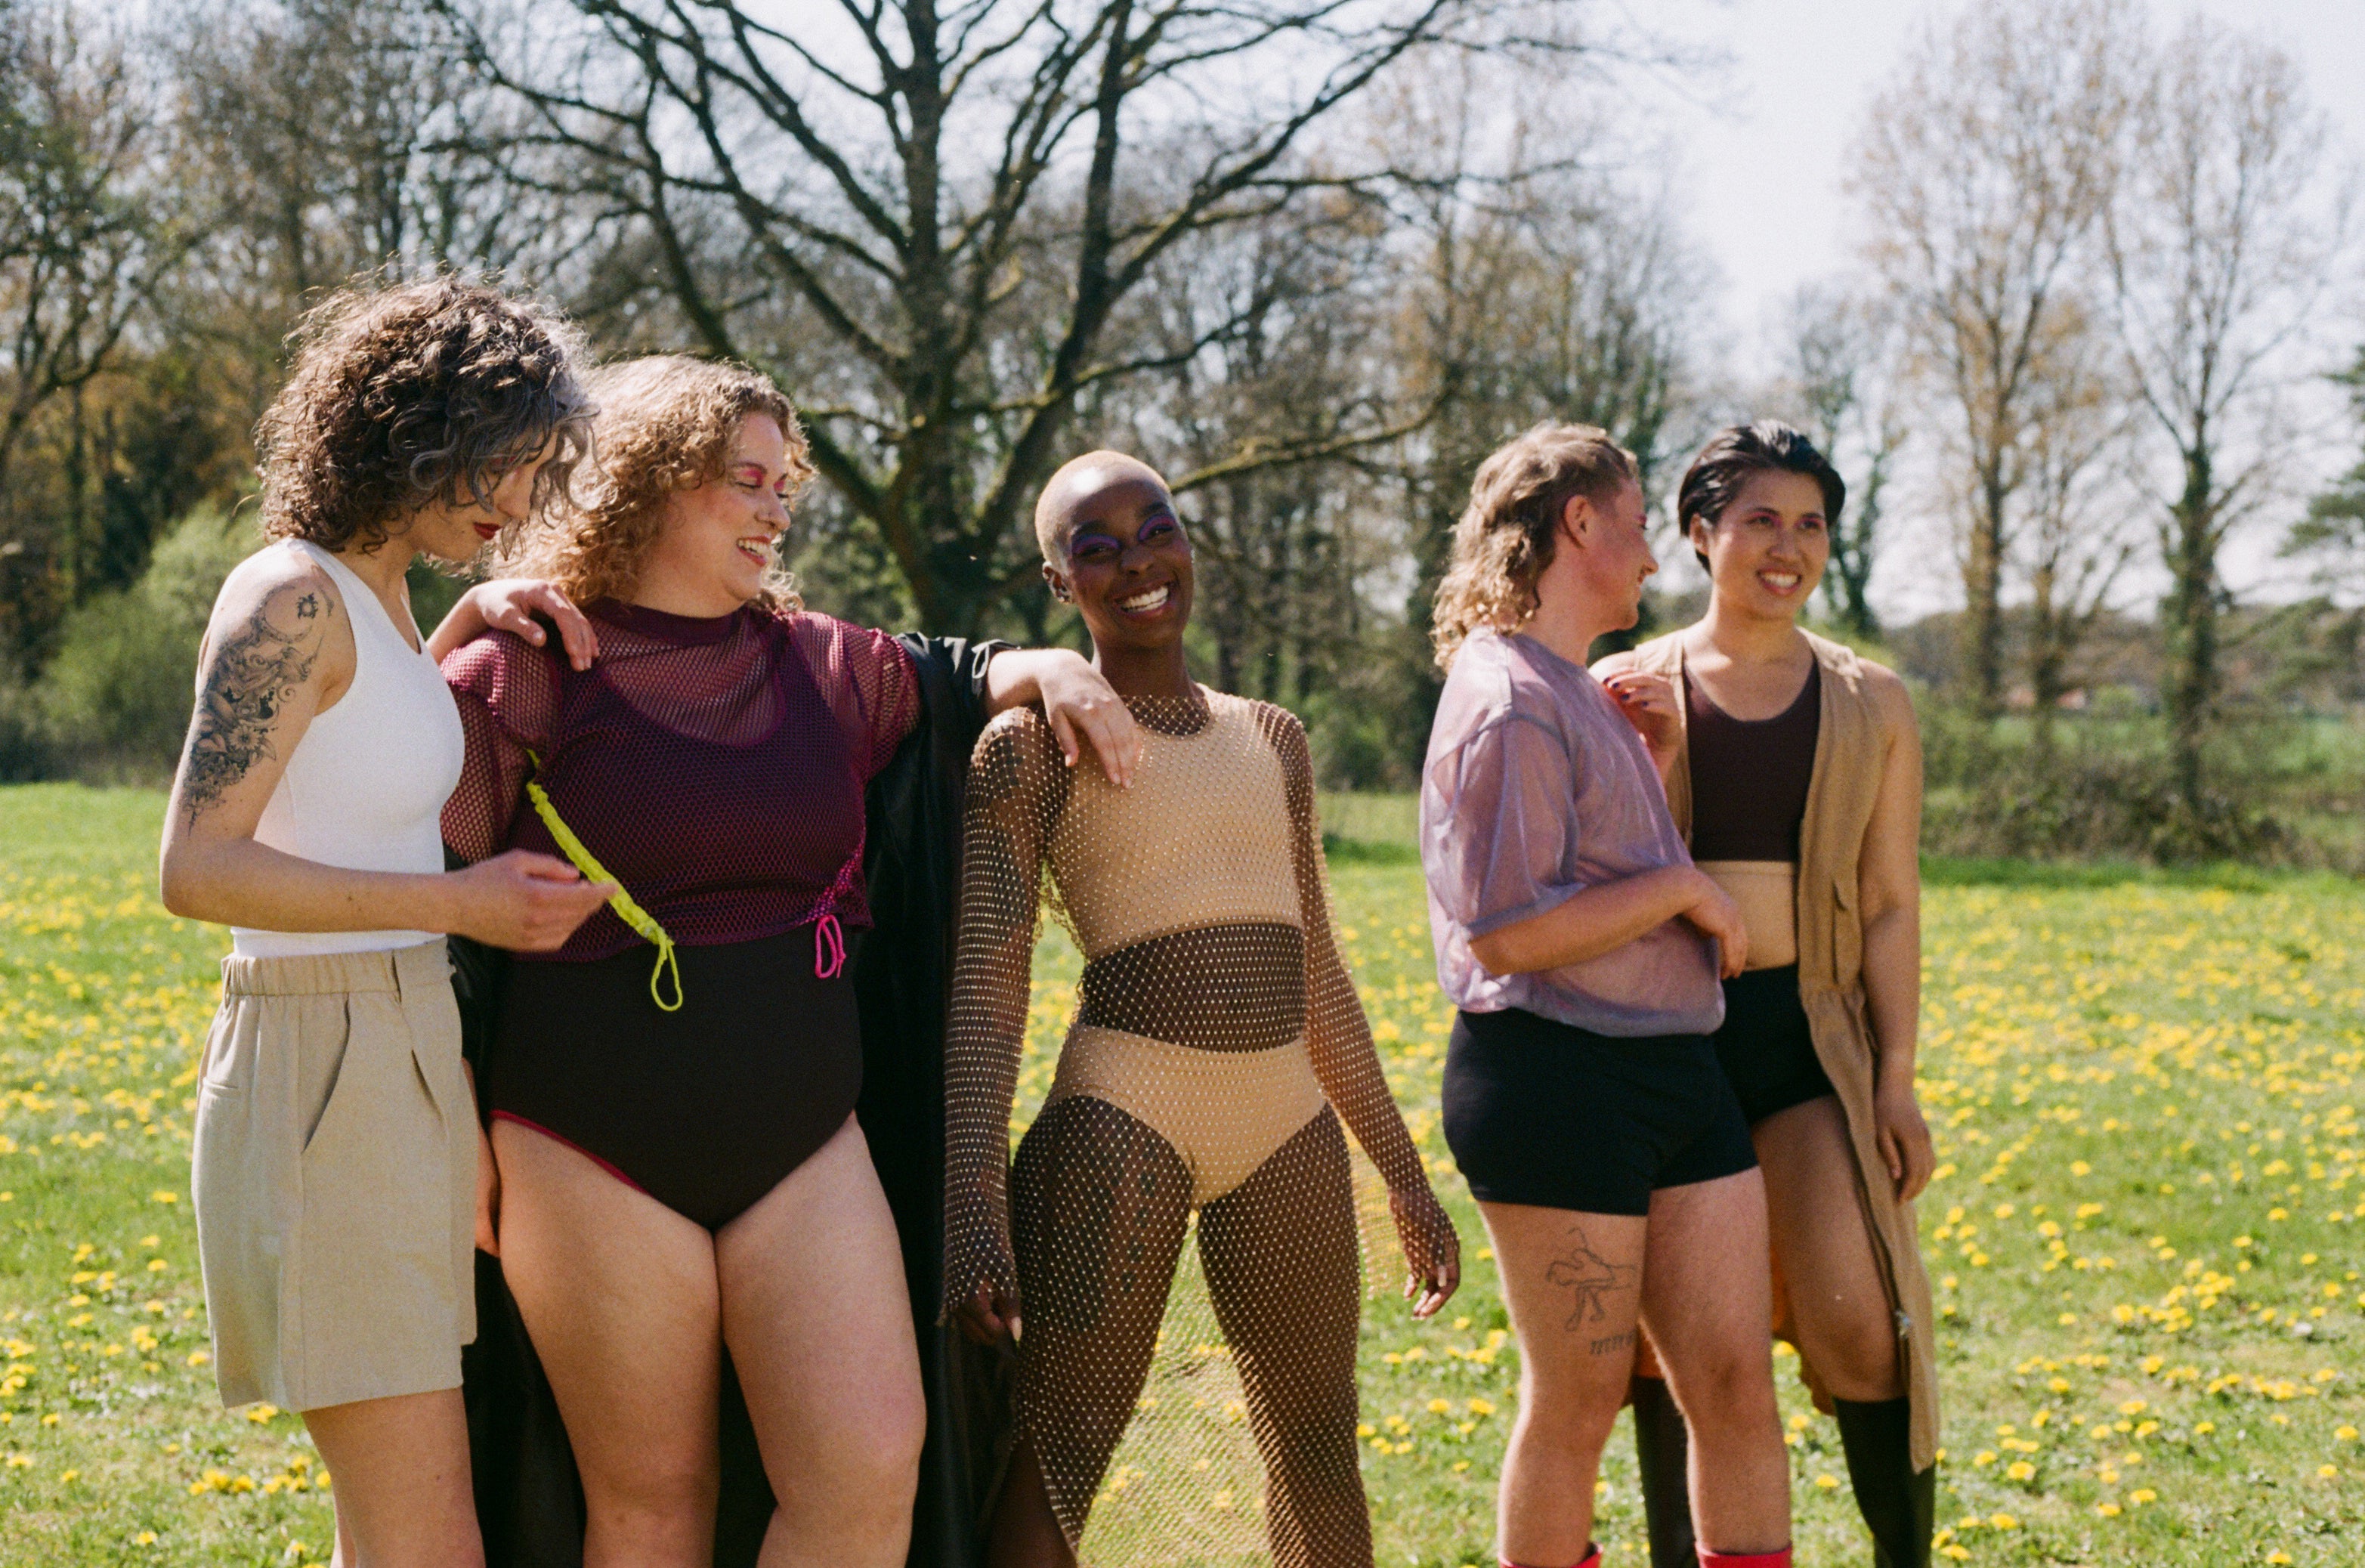 a happy group photo that we took during our gender neutral and gender inclusive photoshoot. the models are wearing chest binders, tucking underwear, packers, and other gender affirming items